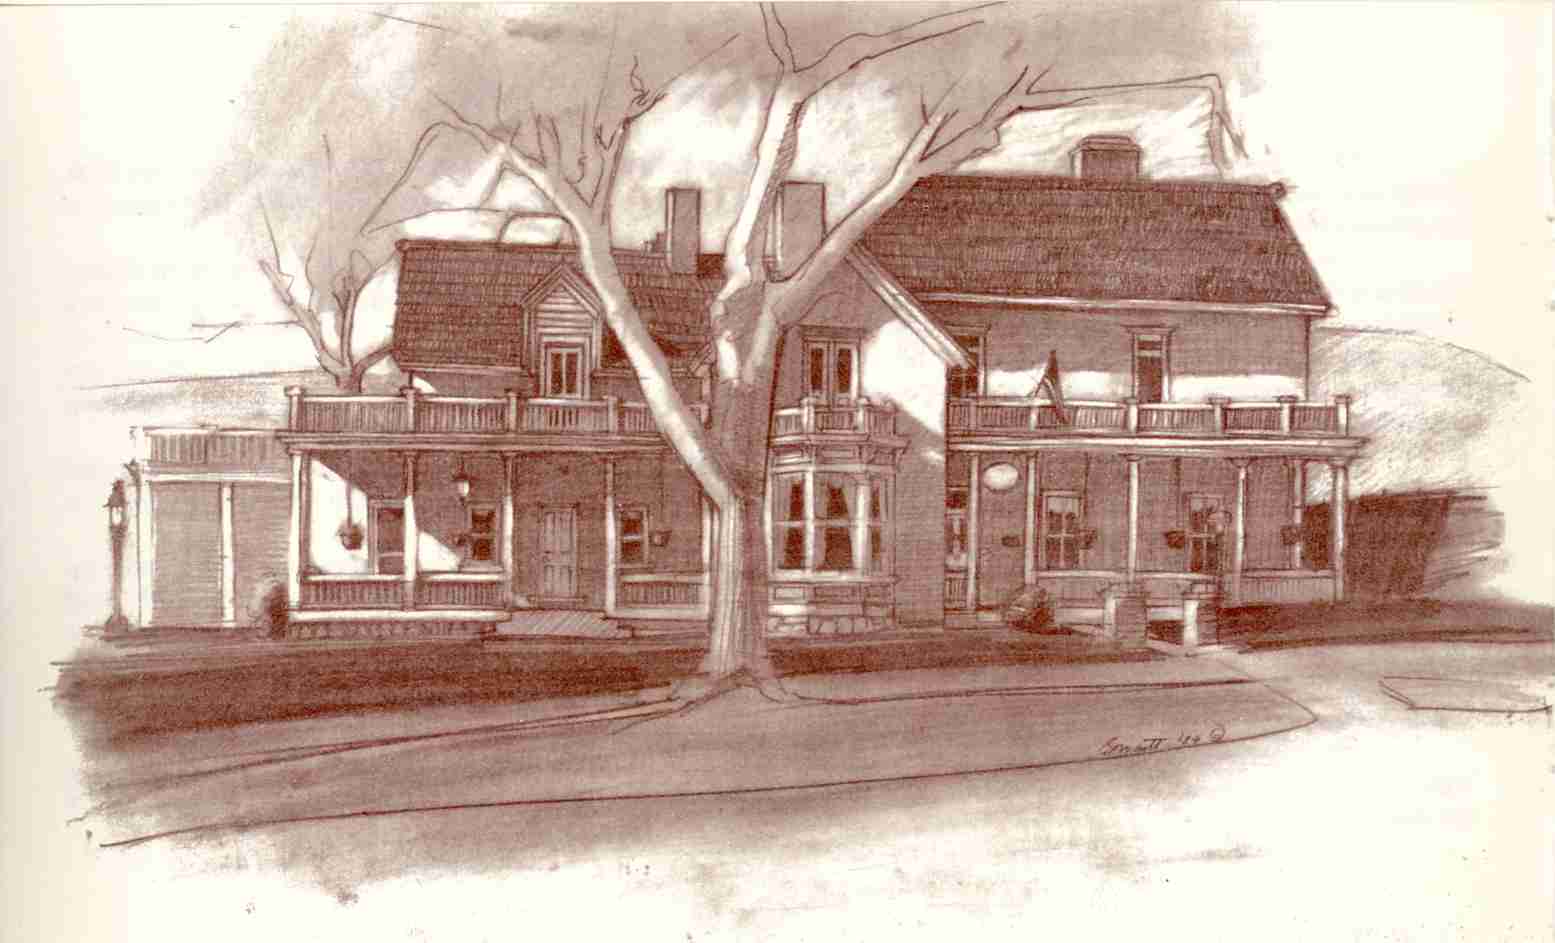 Sketch of the Woolley-Foster Home